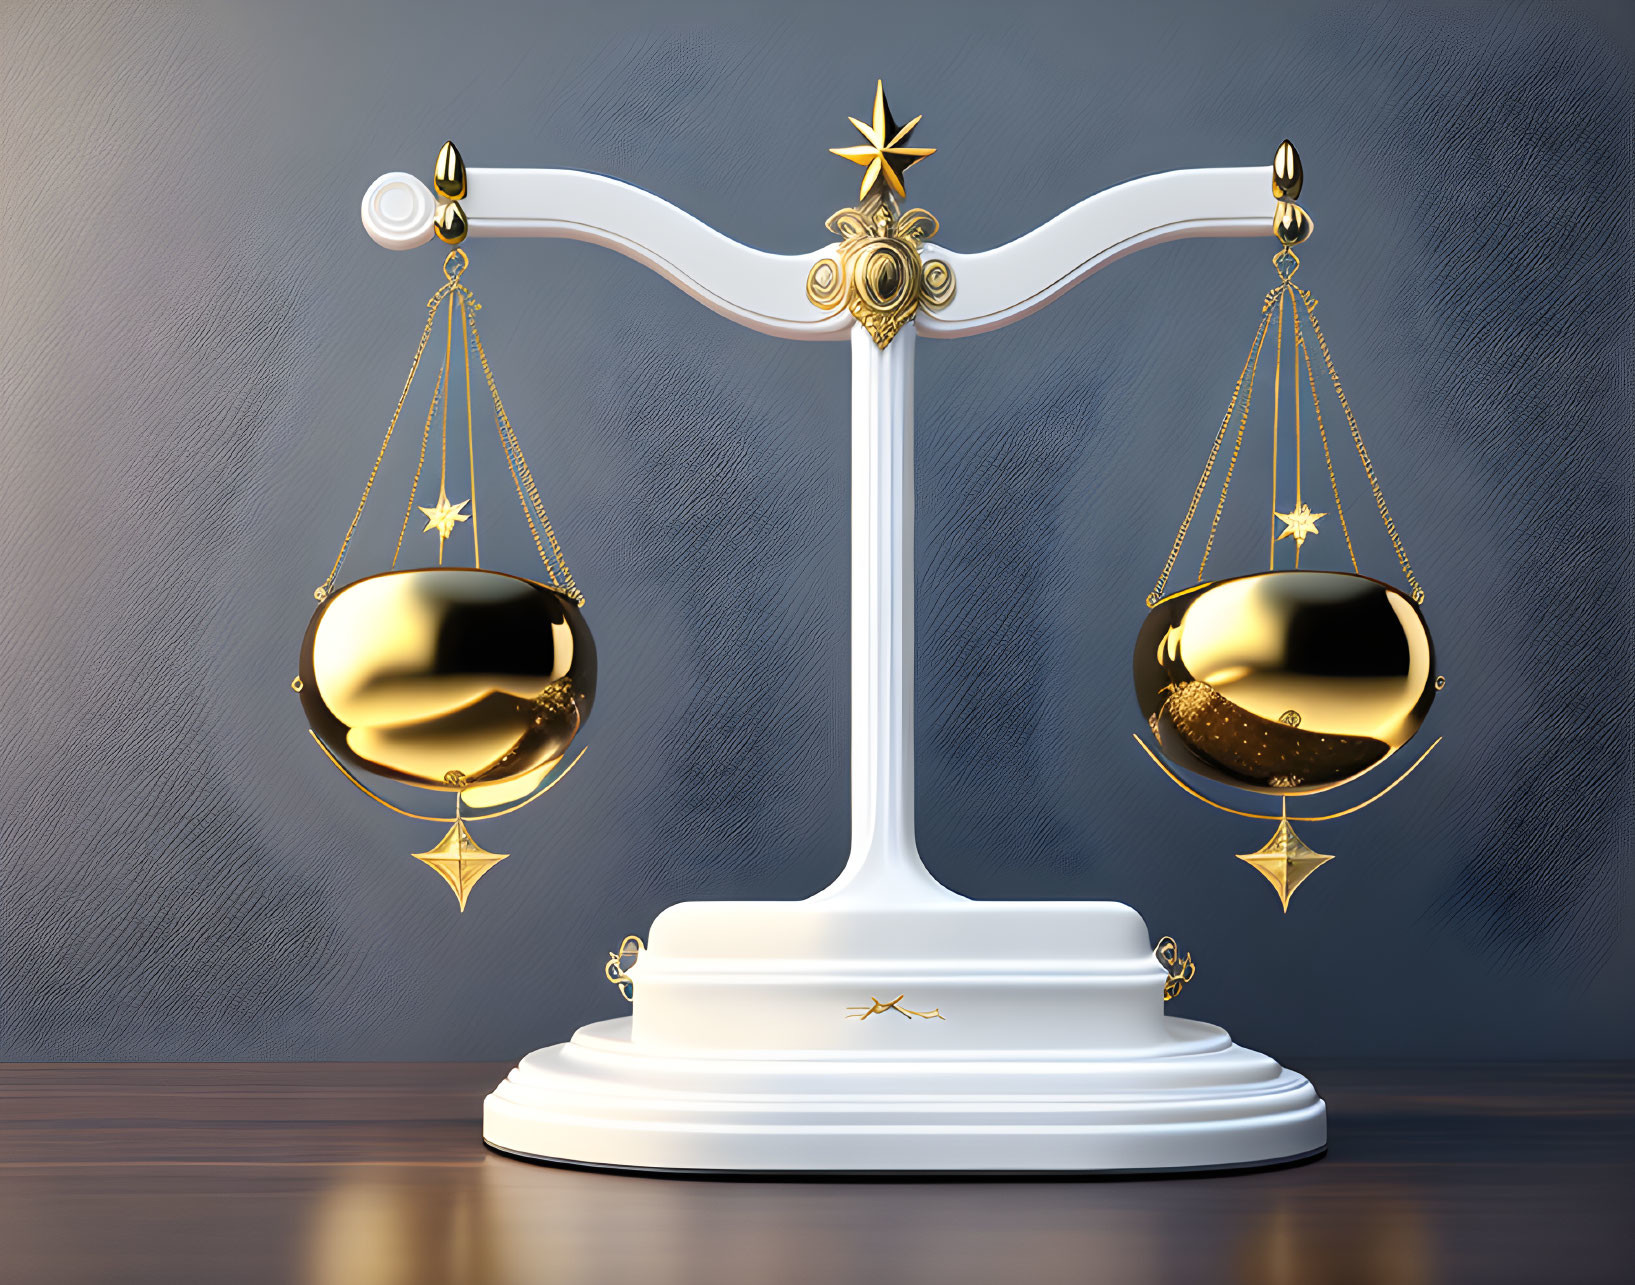 Golden celestial scale symbolizing balance and justice on wooden table against blue background